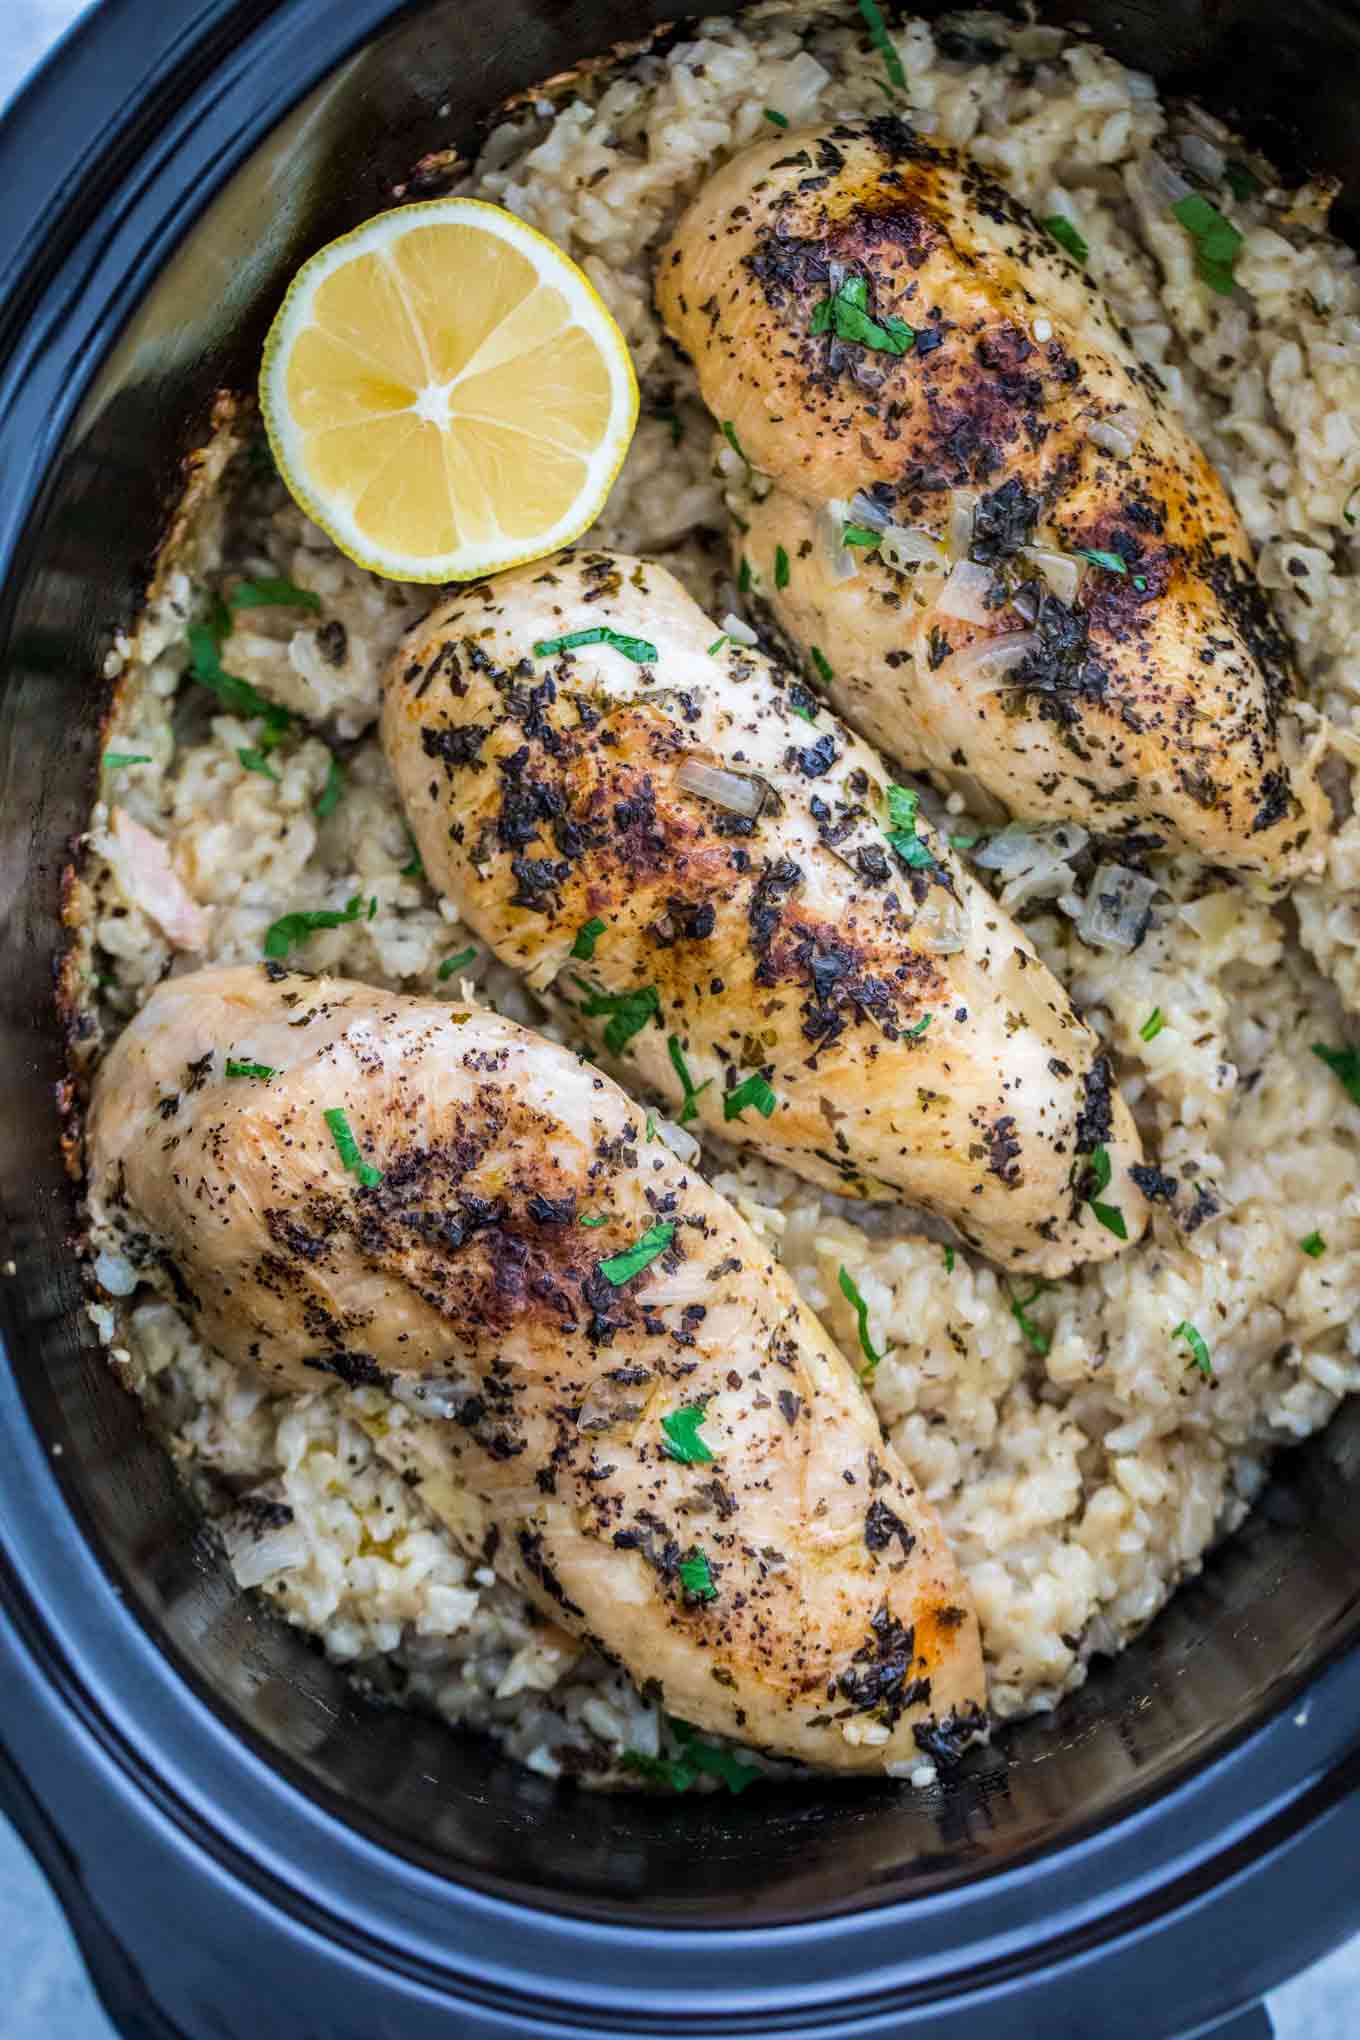 Crockpot Chicken And Rice Video Sweet And Savory Meals,Angel Fish